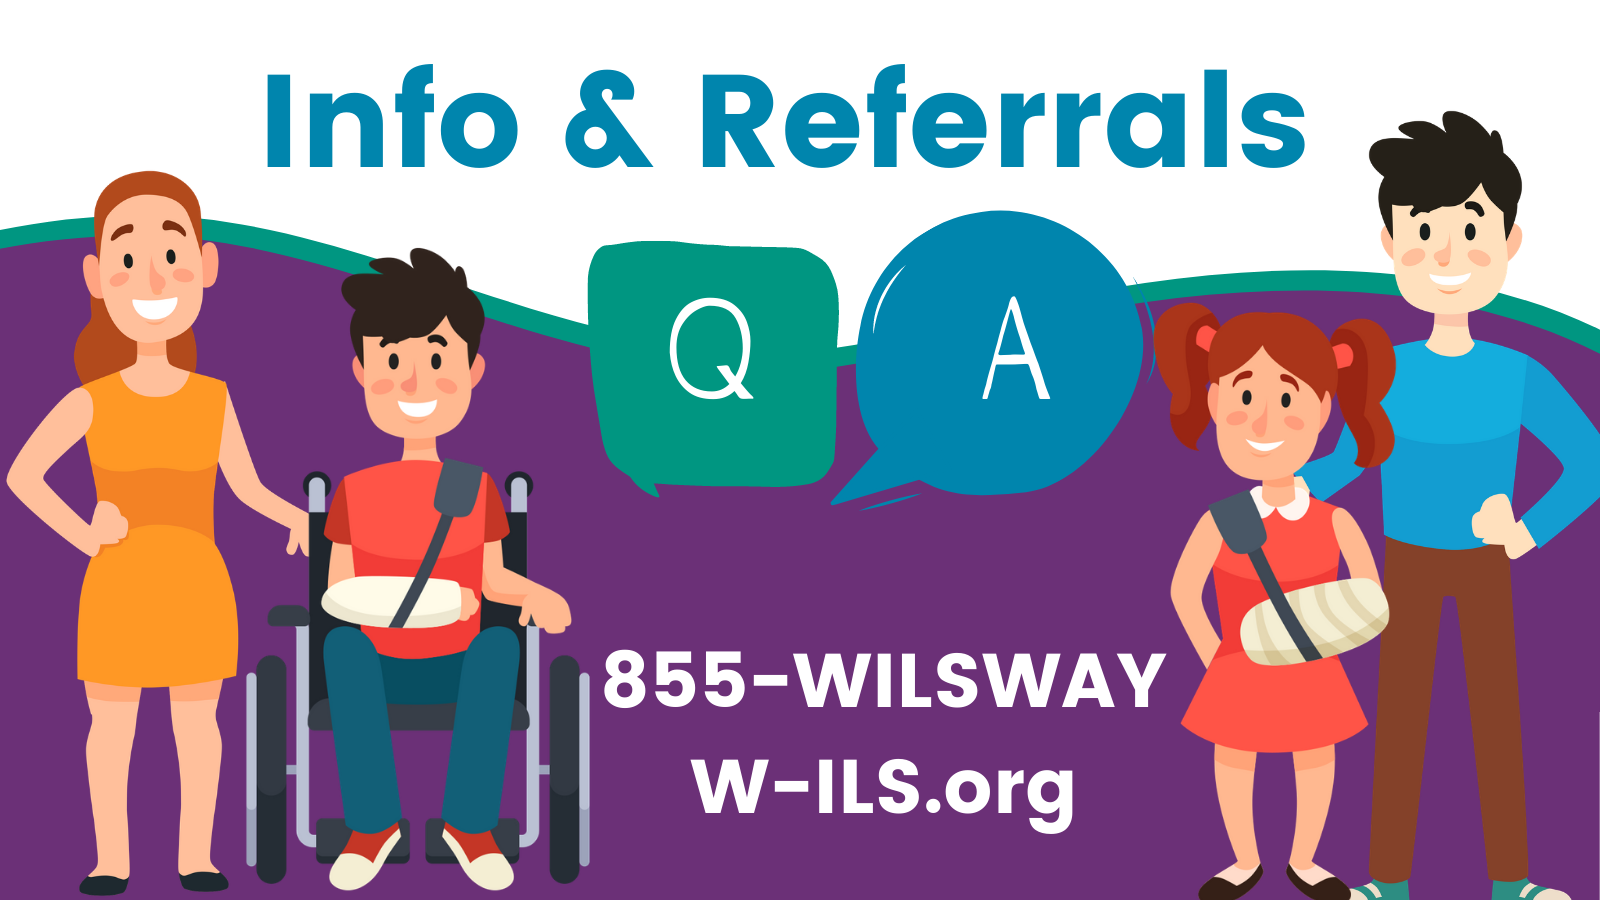 For WILS Disability Information and Referral services, call 855-WILSWAY or visit W-ILS.org